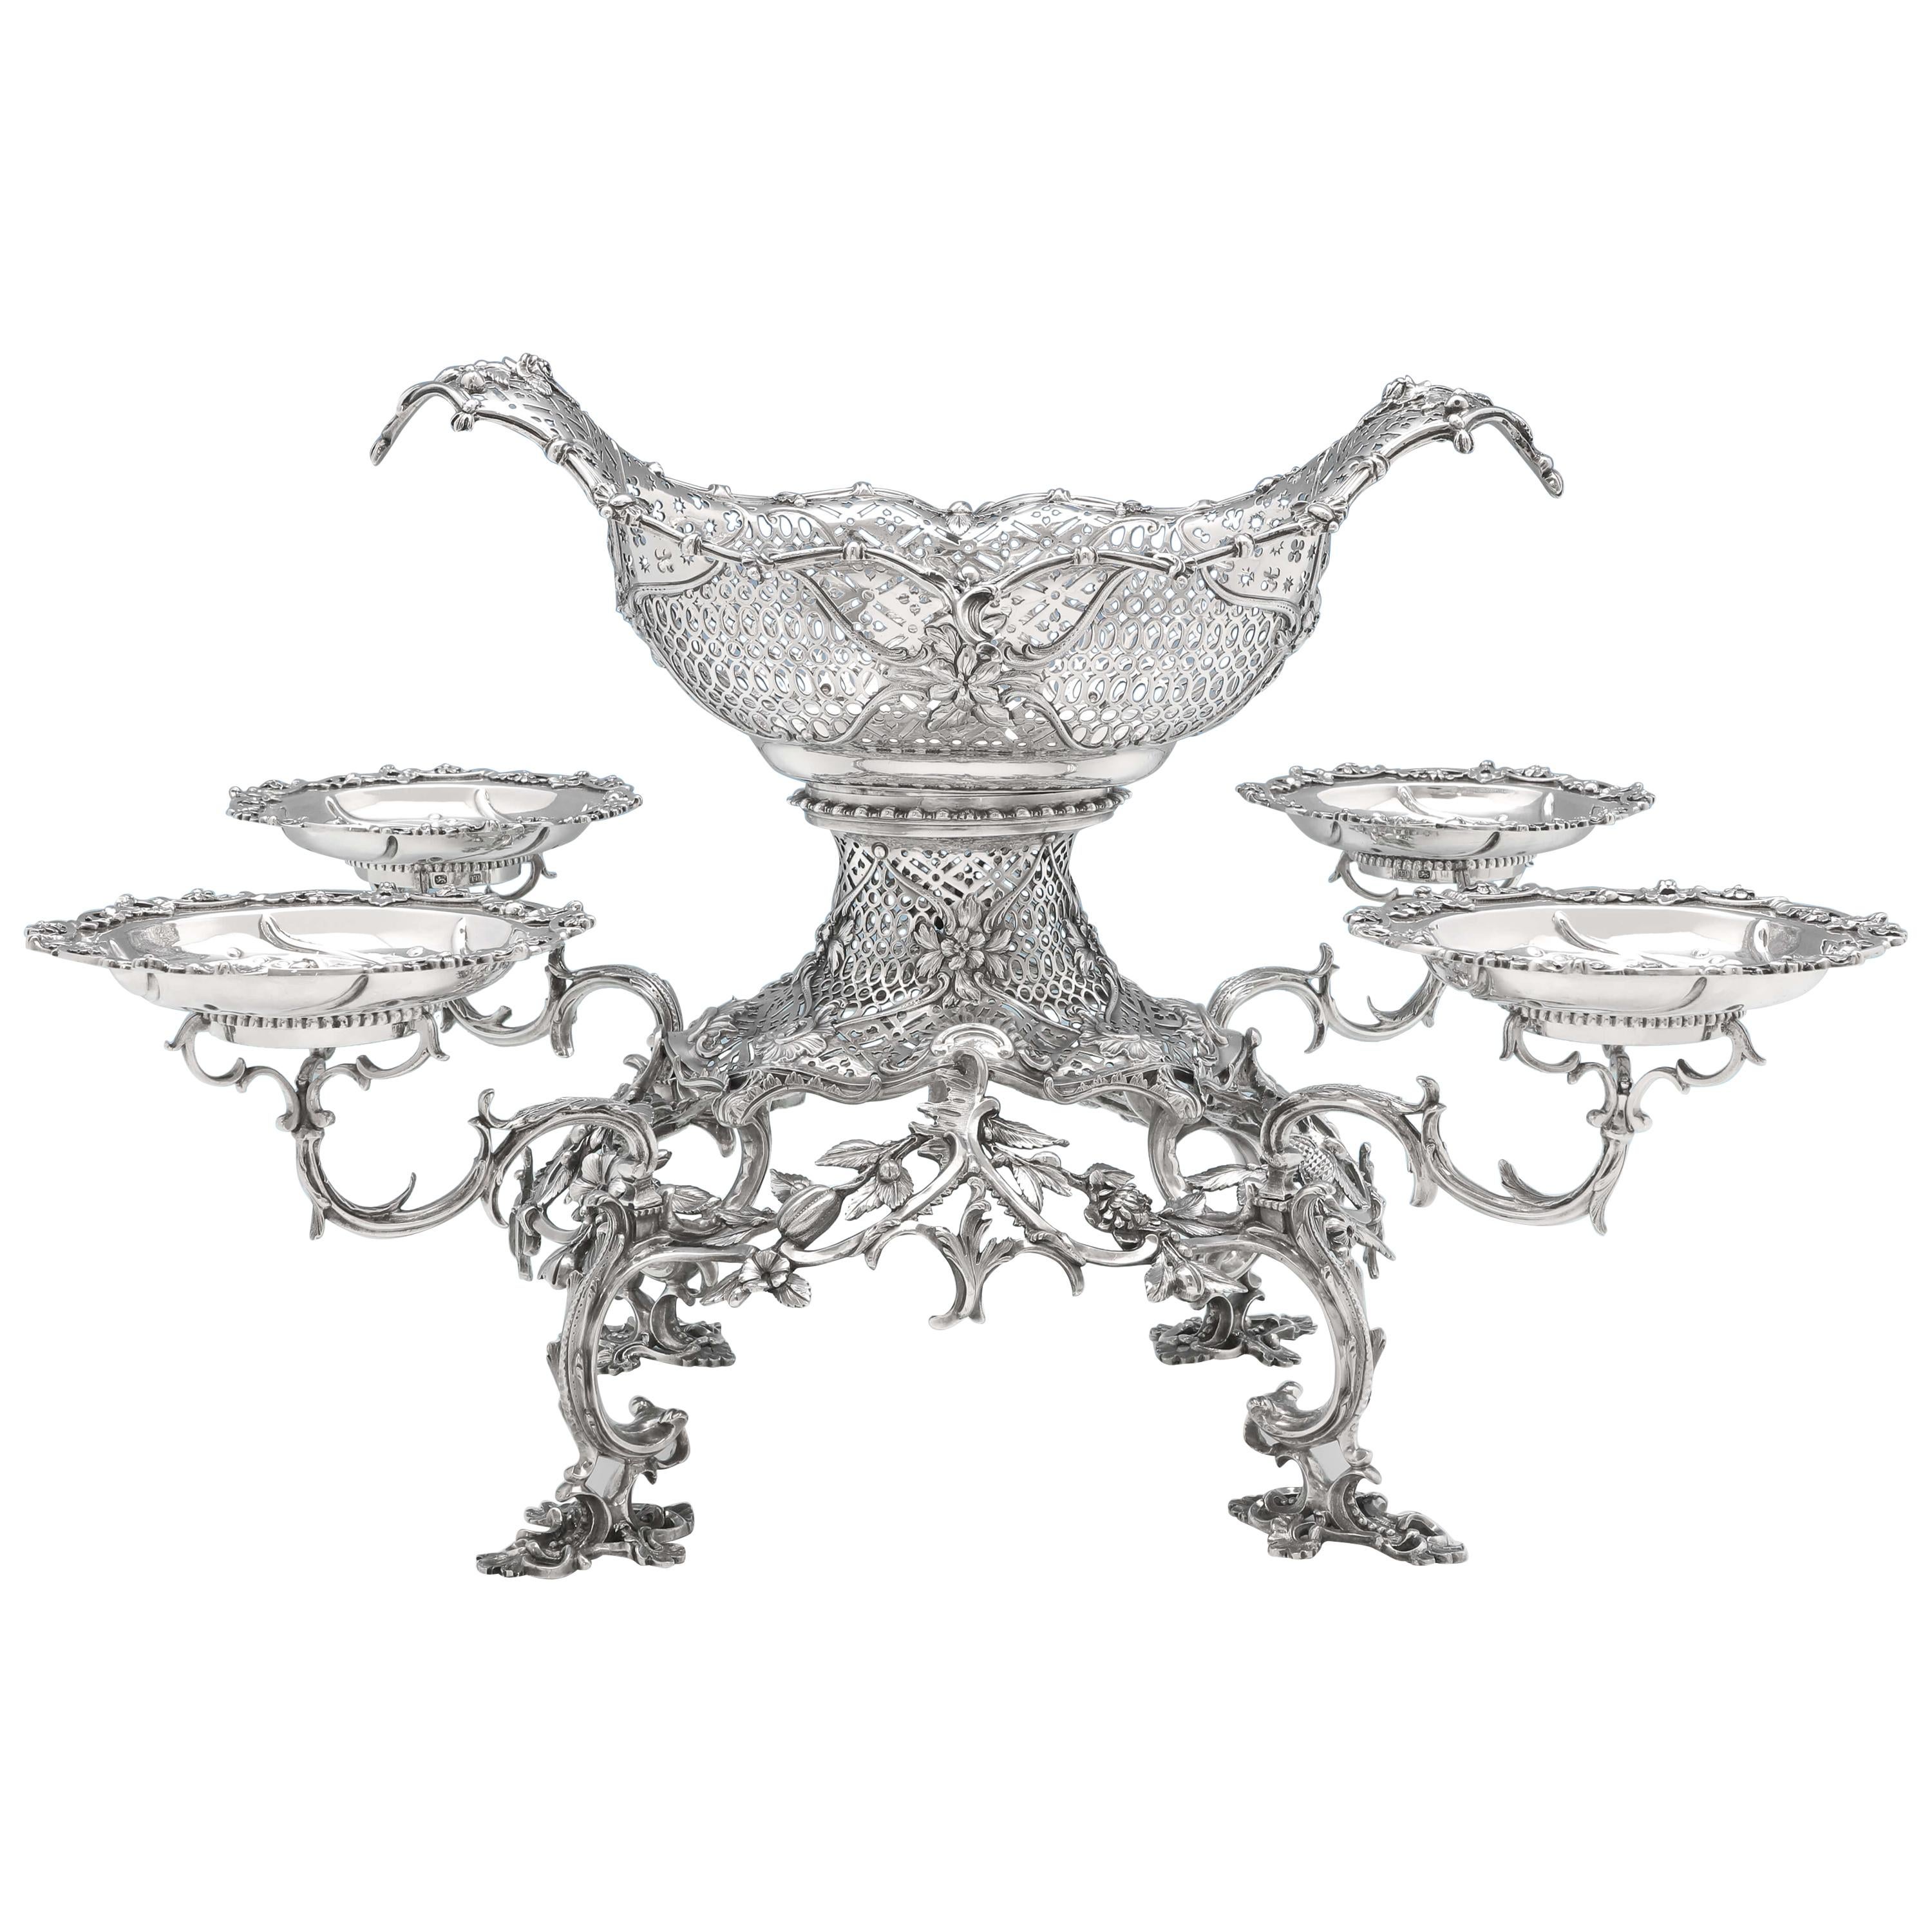 19th Century George III Sterling Silver Epergne by Thomas Pitts